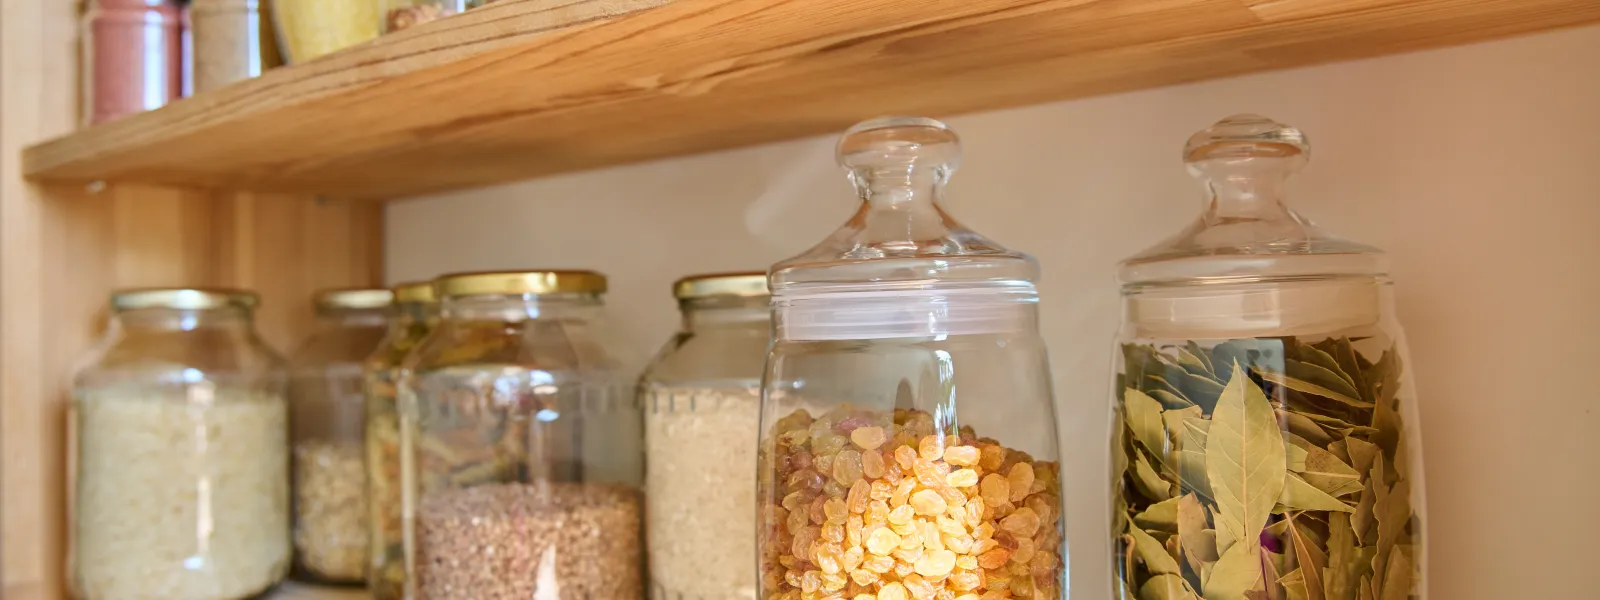 a shelf with jars of food on it